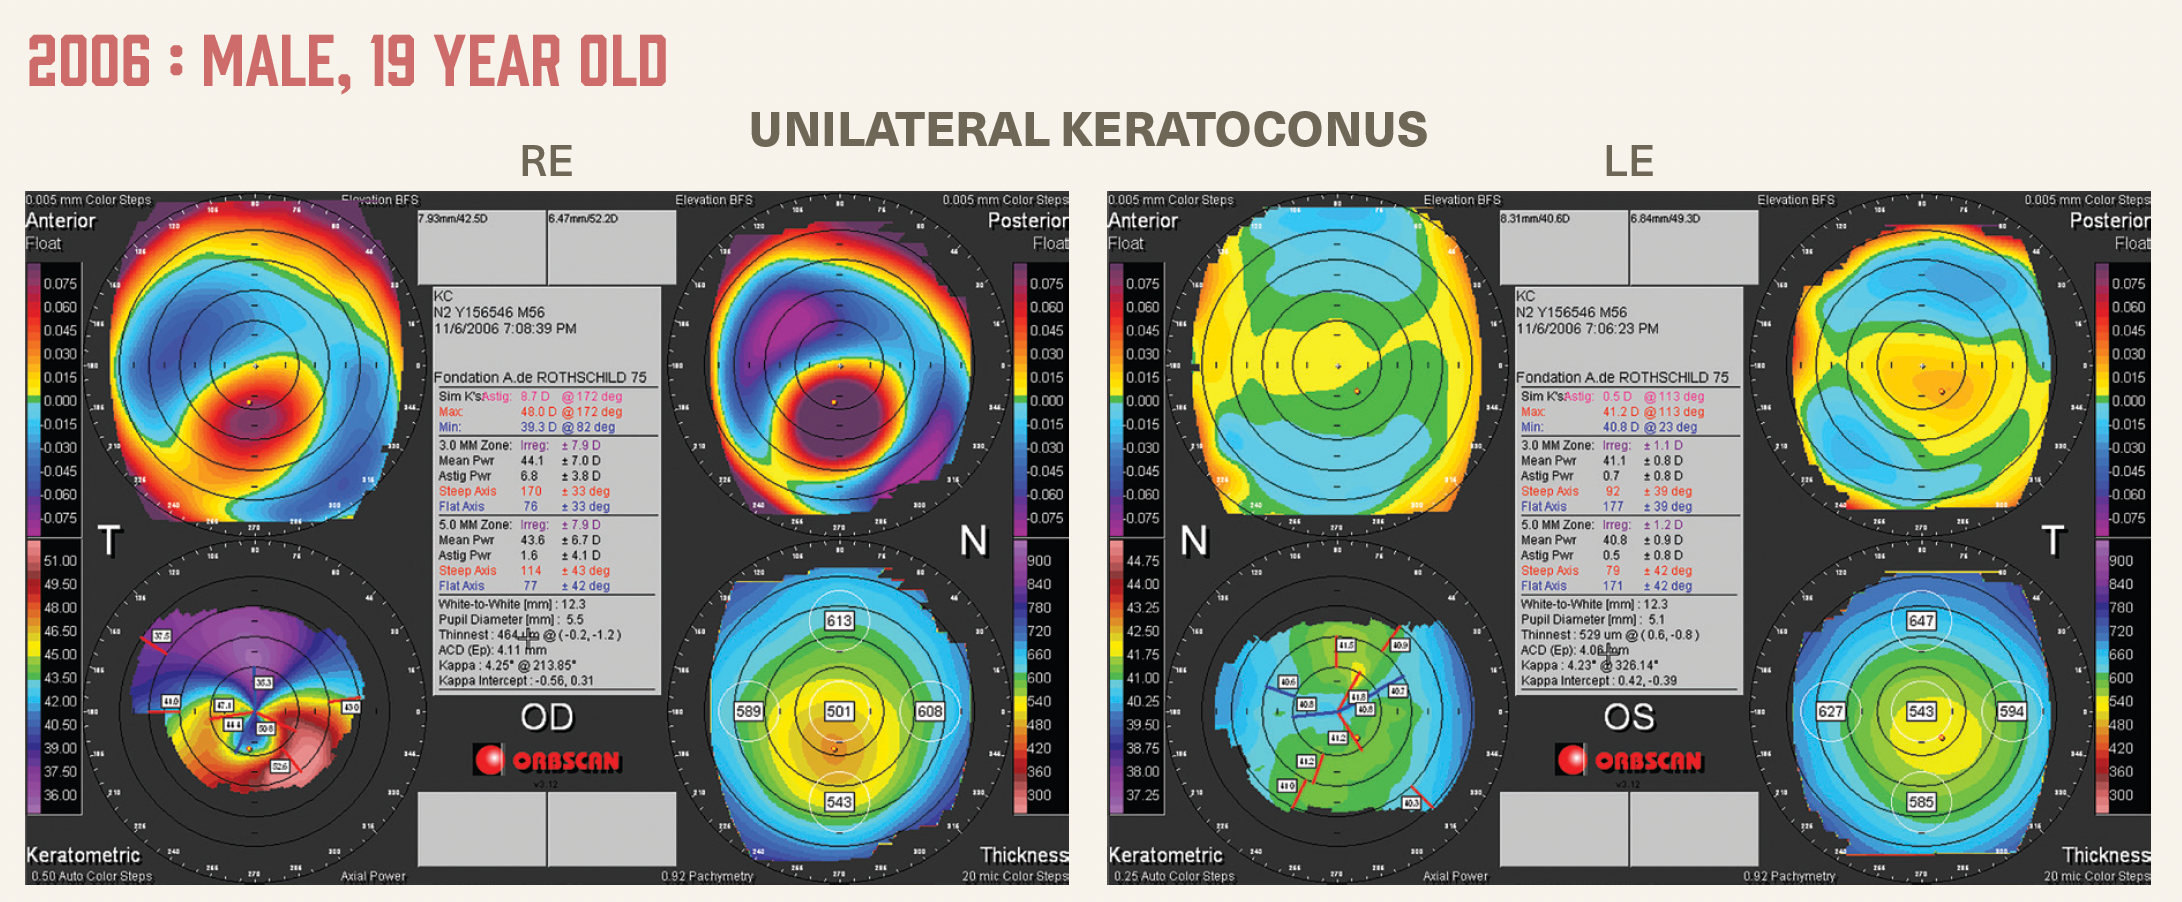 Figure 1: The right cornea is affected by keratoconus. The left cornea remains negative for all topographical and biomechanical indices of detection.